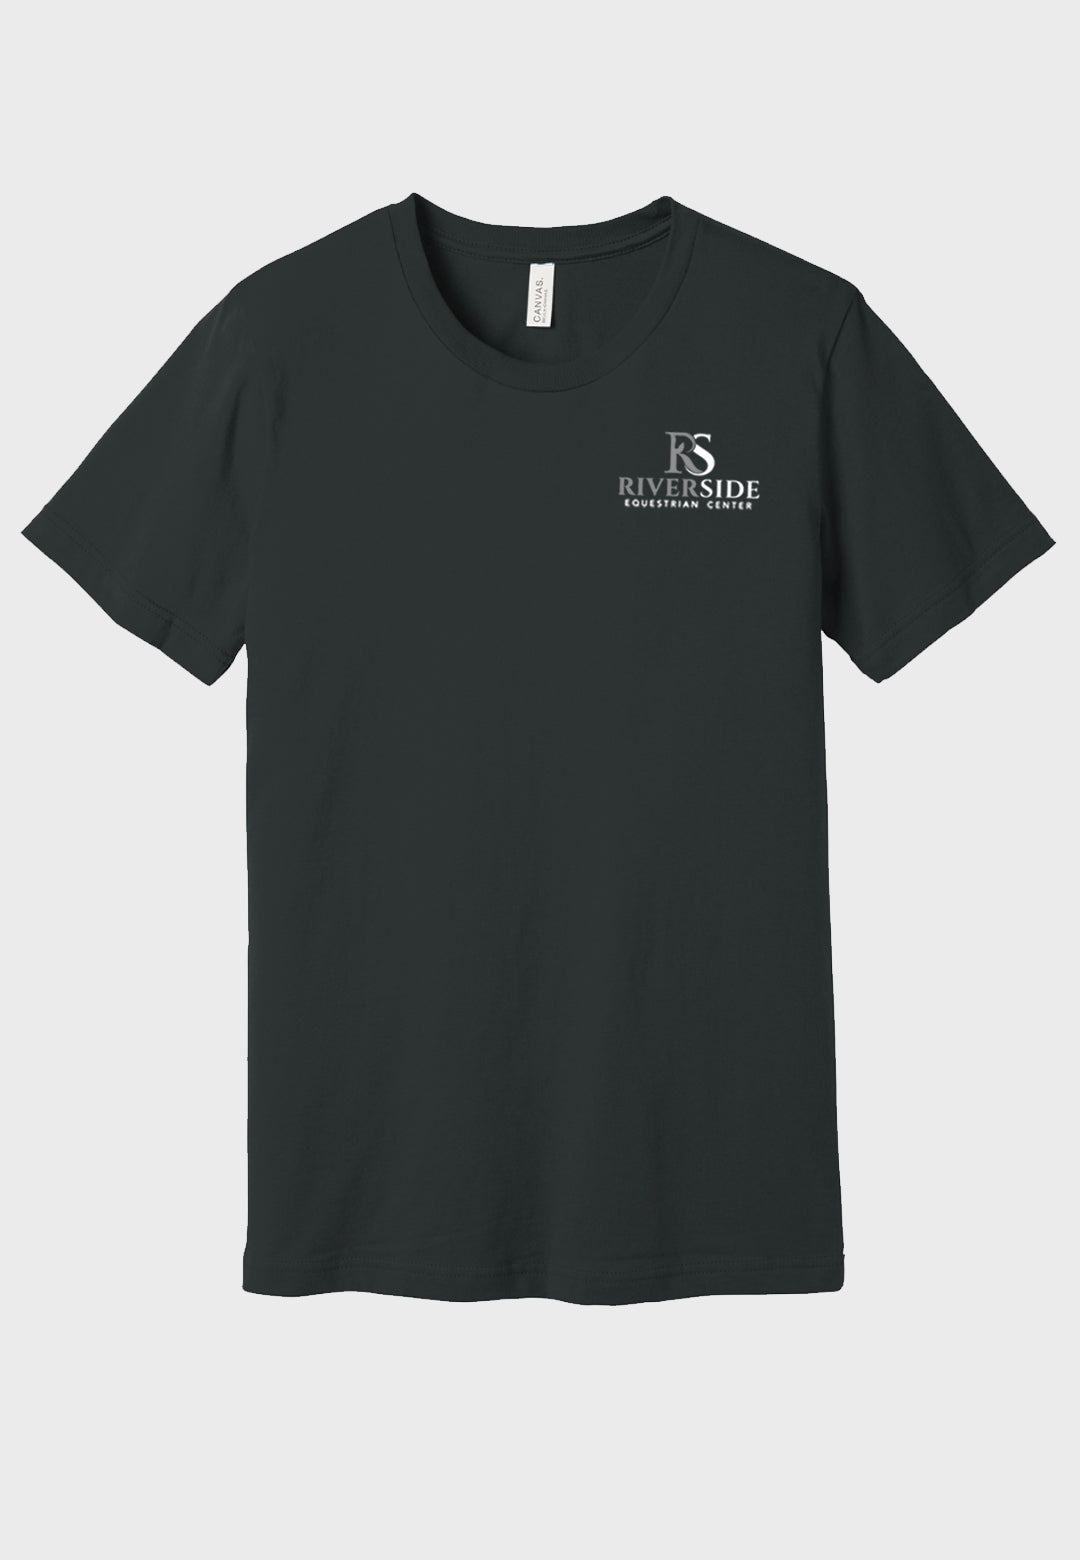 Riverside Equestrian Center BELLA+CANVAS ® Unisex Jersey Short Sleeve Tee - Adult/Youth Sizes, 3 Color Options